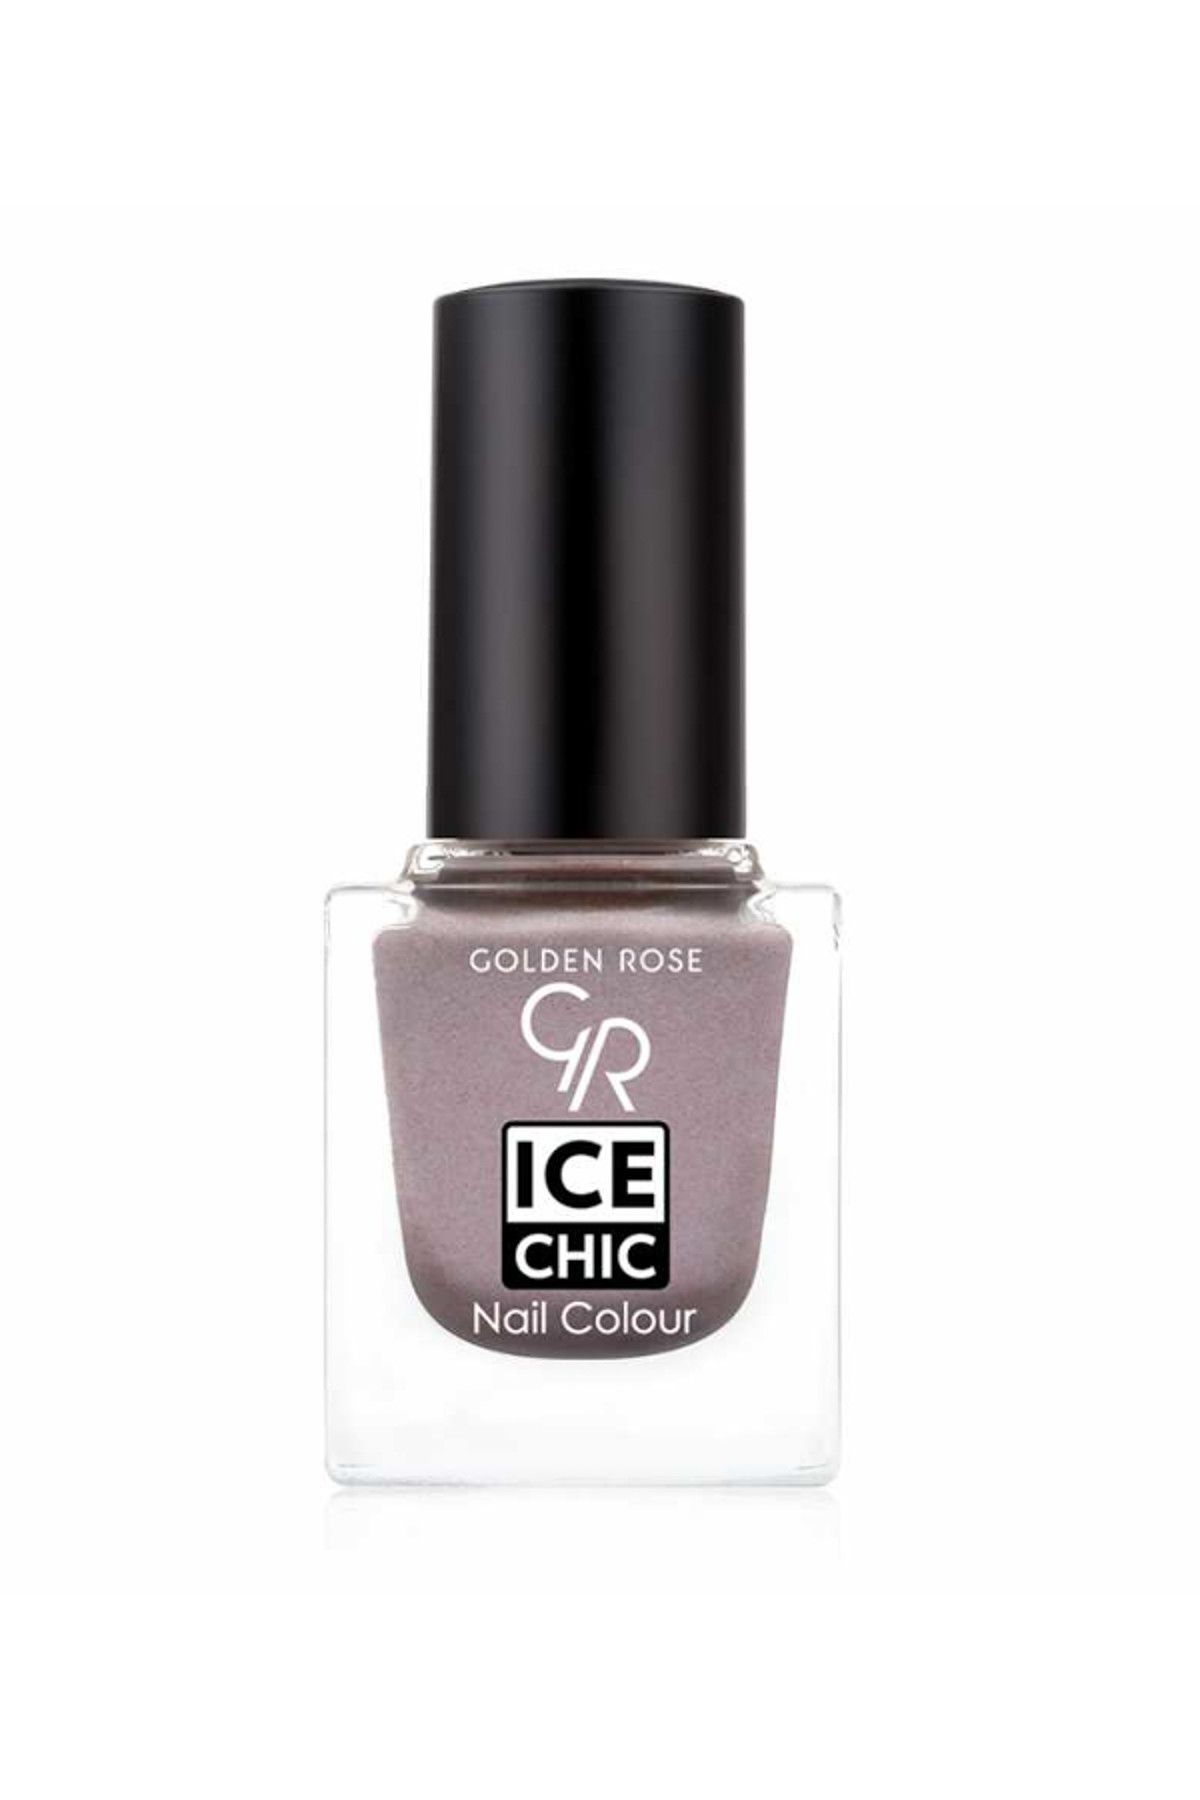 Golden Rose Oje - Ice Chic Nail Colour No: 64 8691190860646